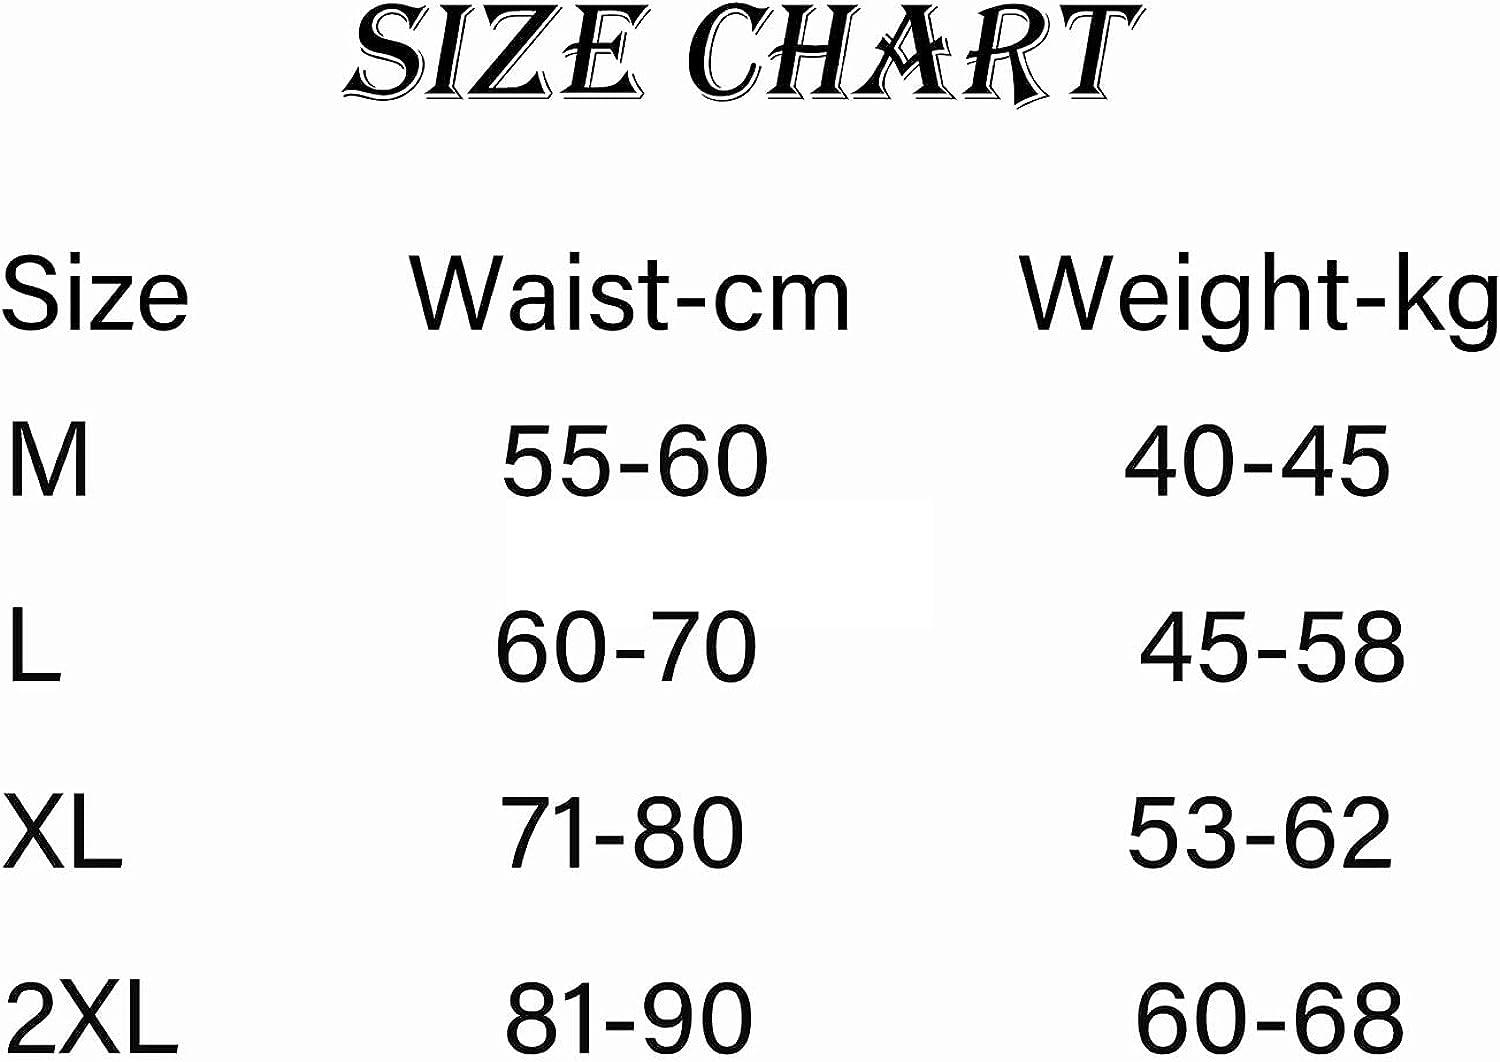 Cross Compression Abs Shaping Pants Women Slimming Body Shaper Tummy  Control